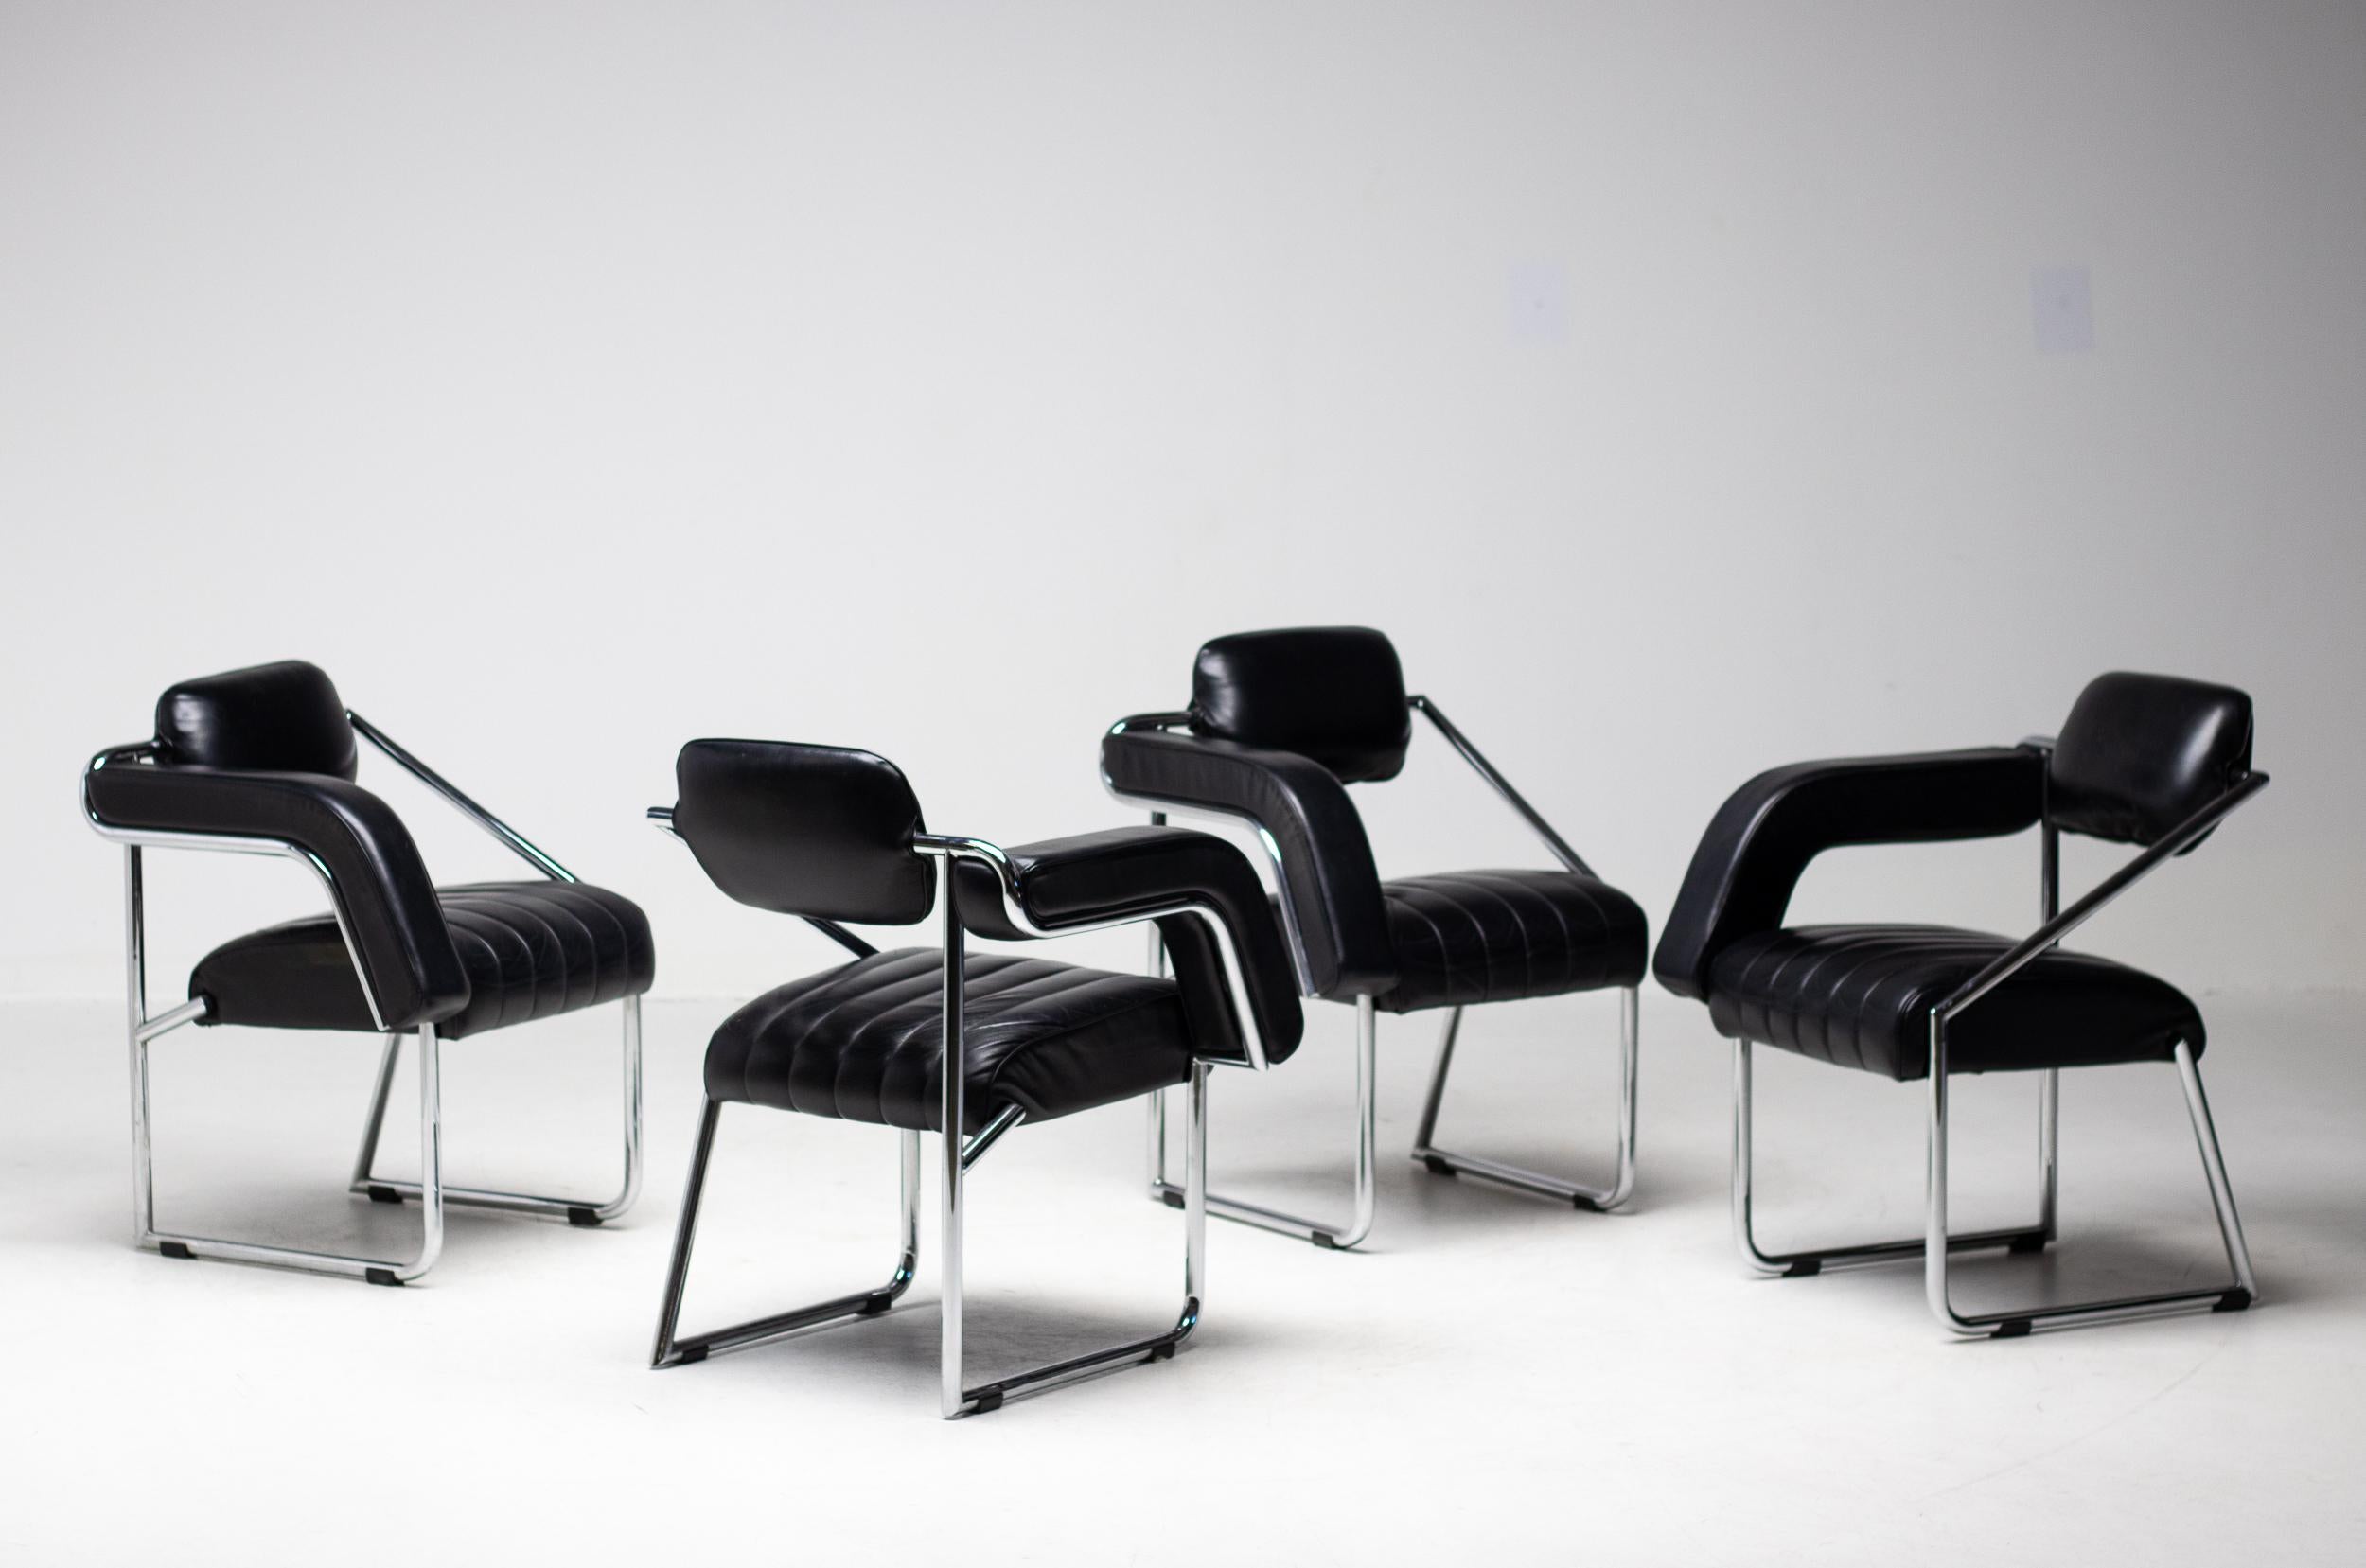 Unique set of 4 Non Conformist chairs made circa 1970 by Ecart International.
The underlying theme of the Non Conformist chair, by Irish designer Eileen Gray (1878–1976), is comfort. 
Its tubular frame was designed ergonomically, as Gray understood